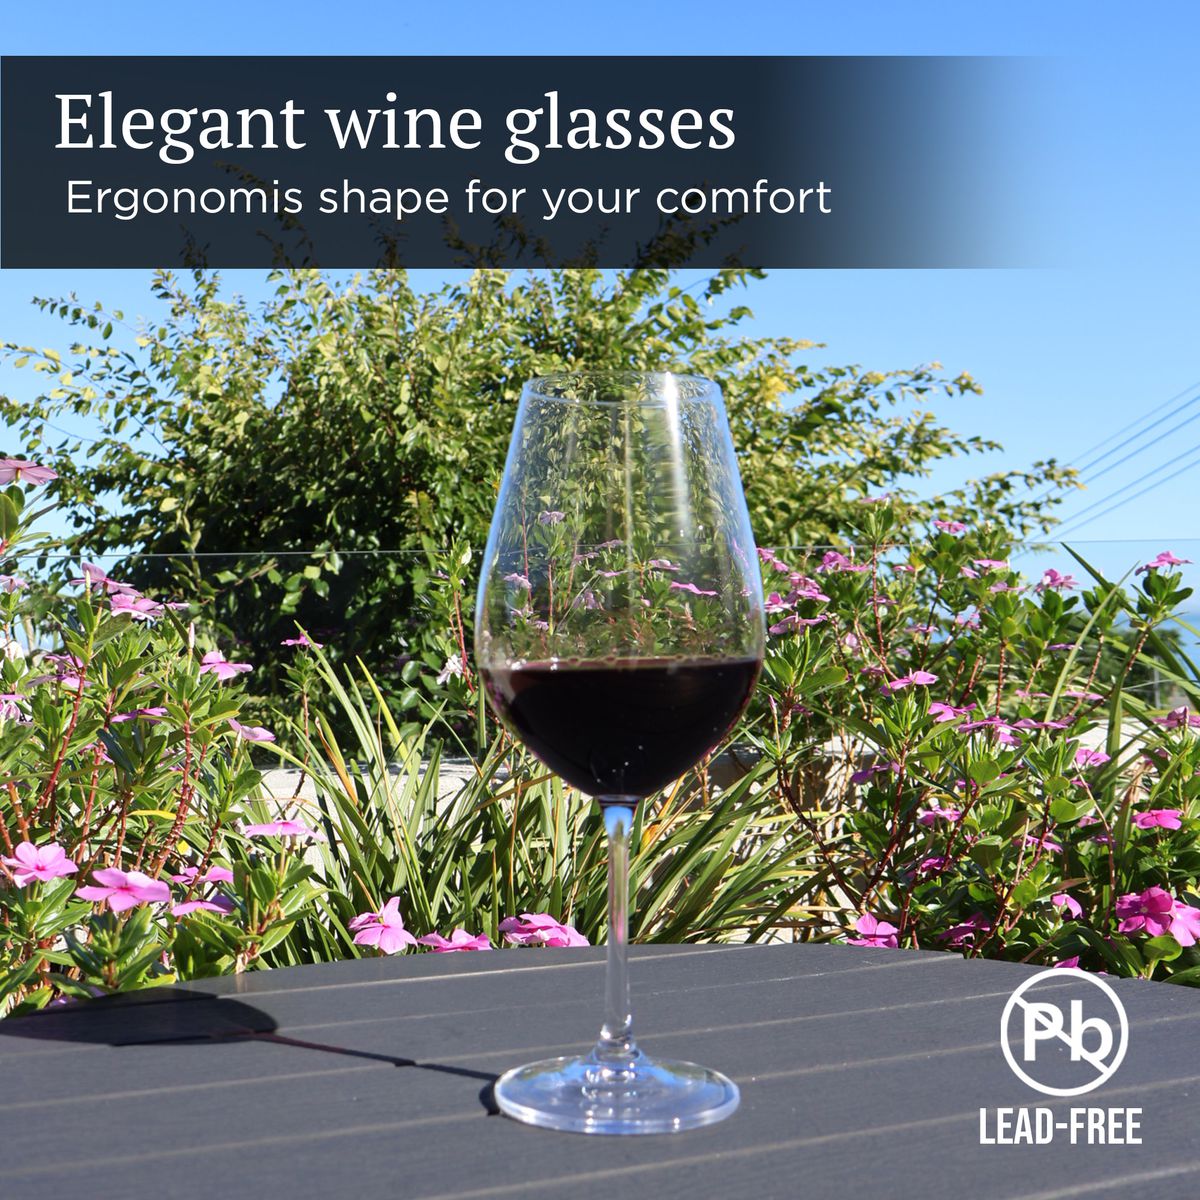 Red Wine Glasses Lead-Free Crystalline - 690ml - 4 Pieces